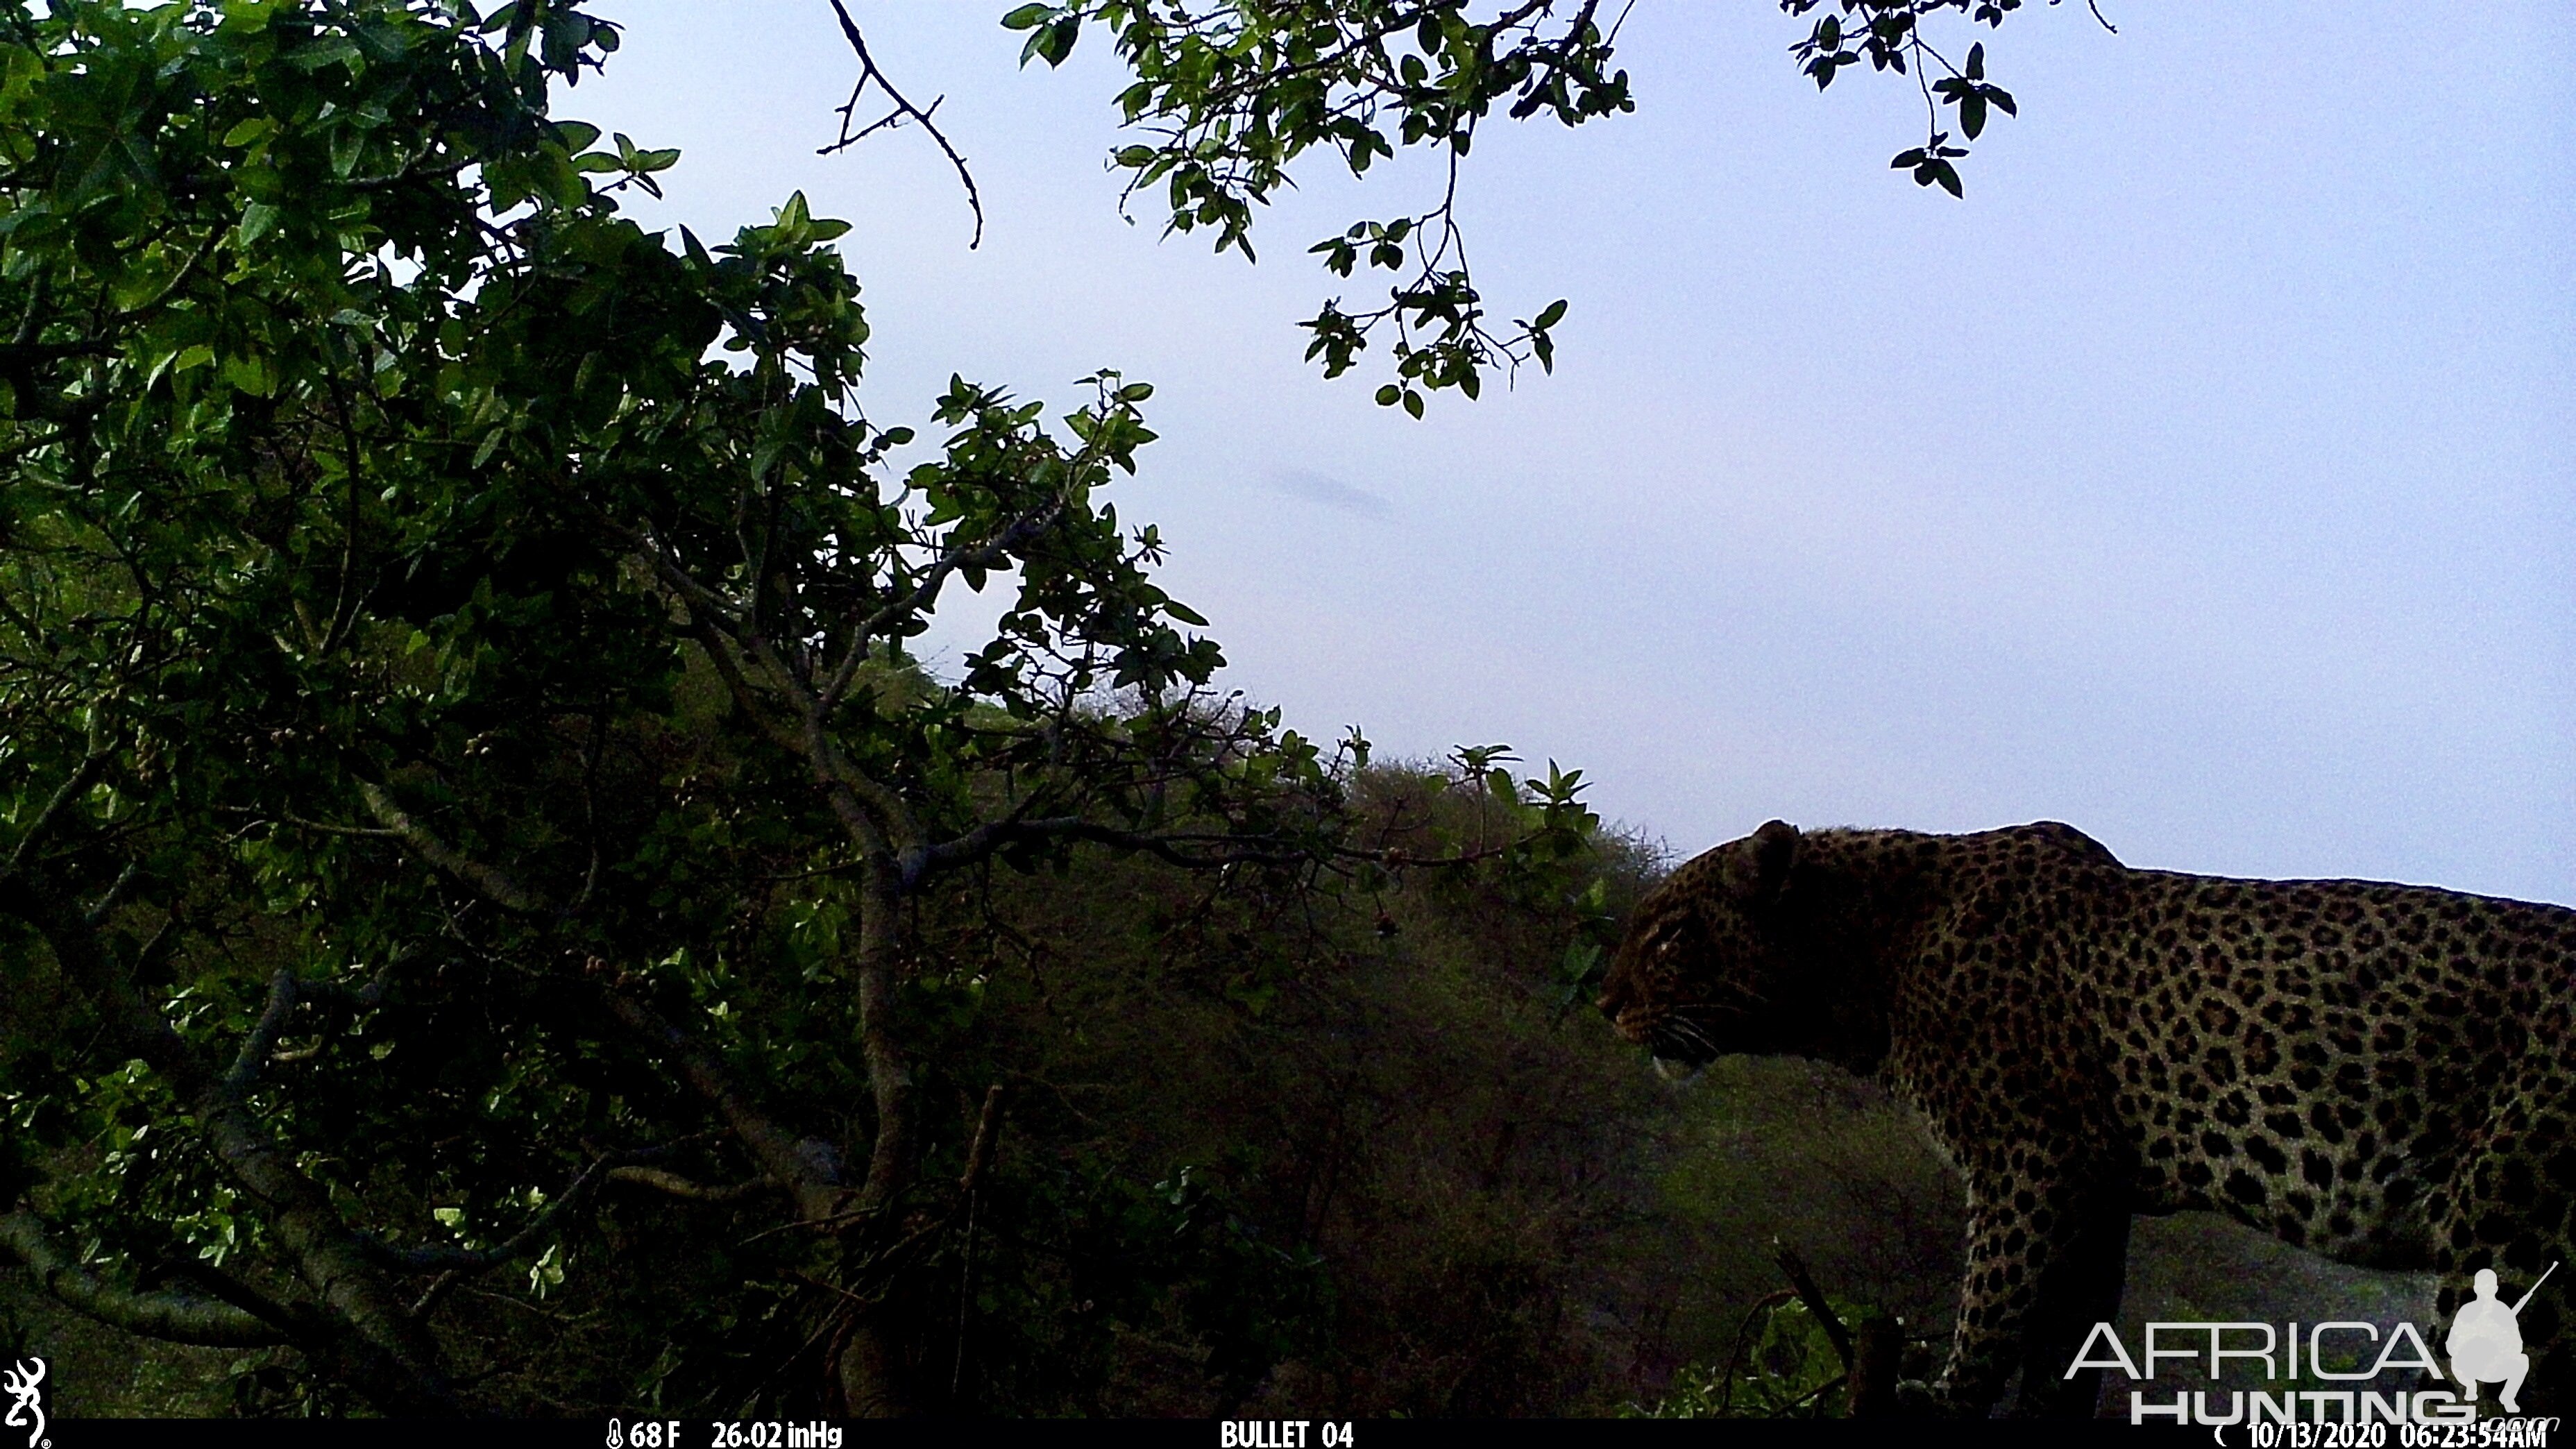 View of Leopard from Blind